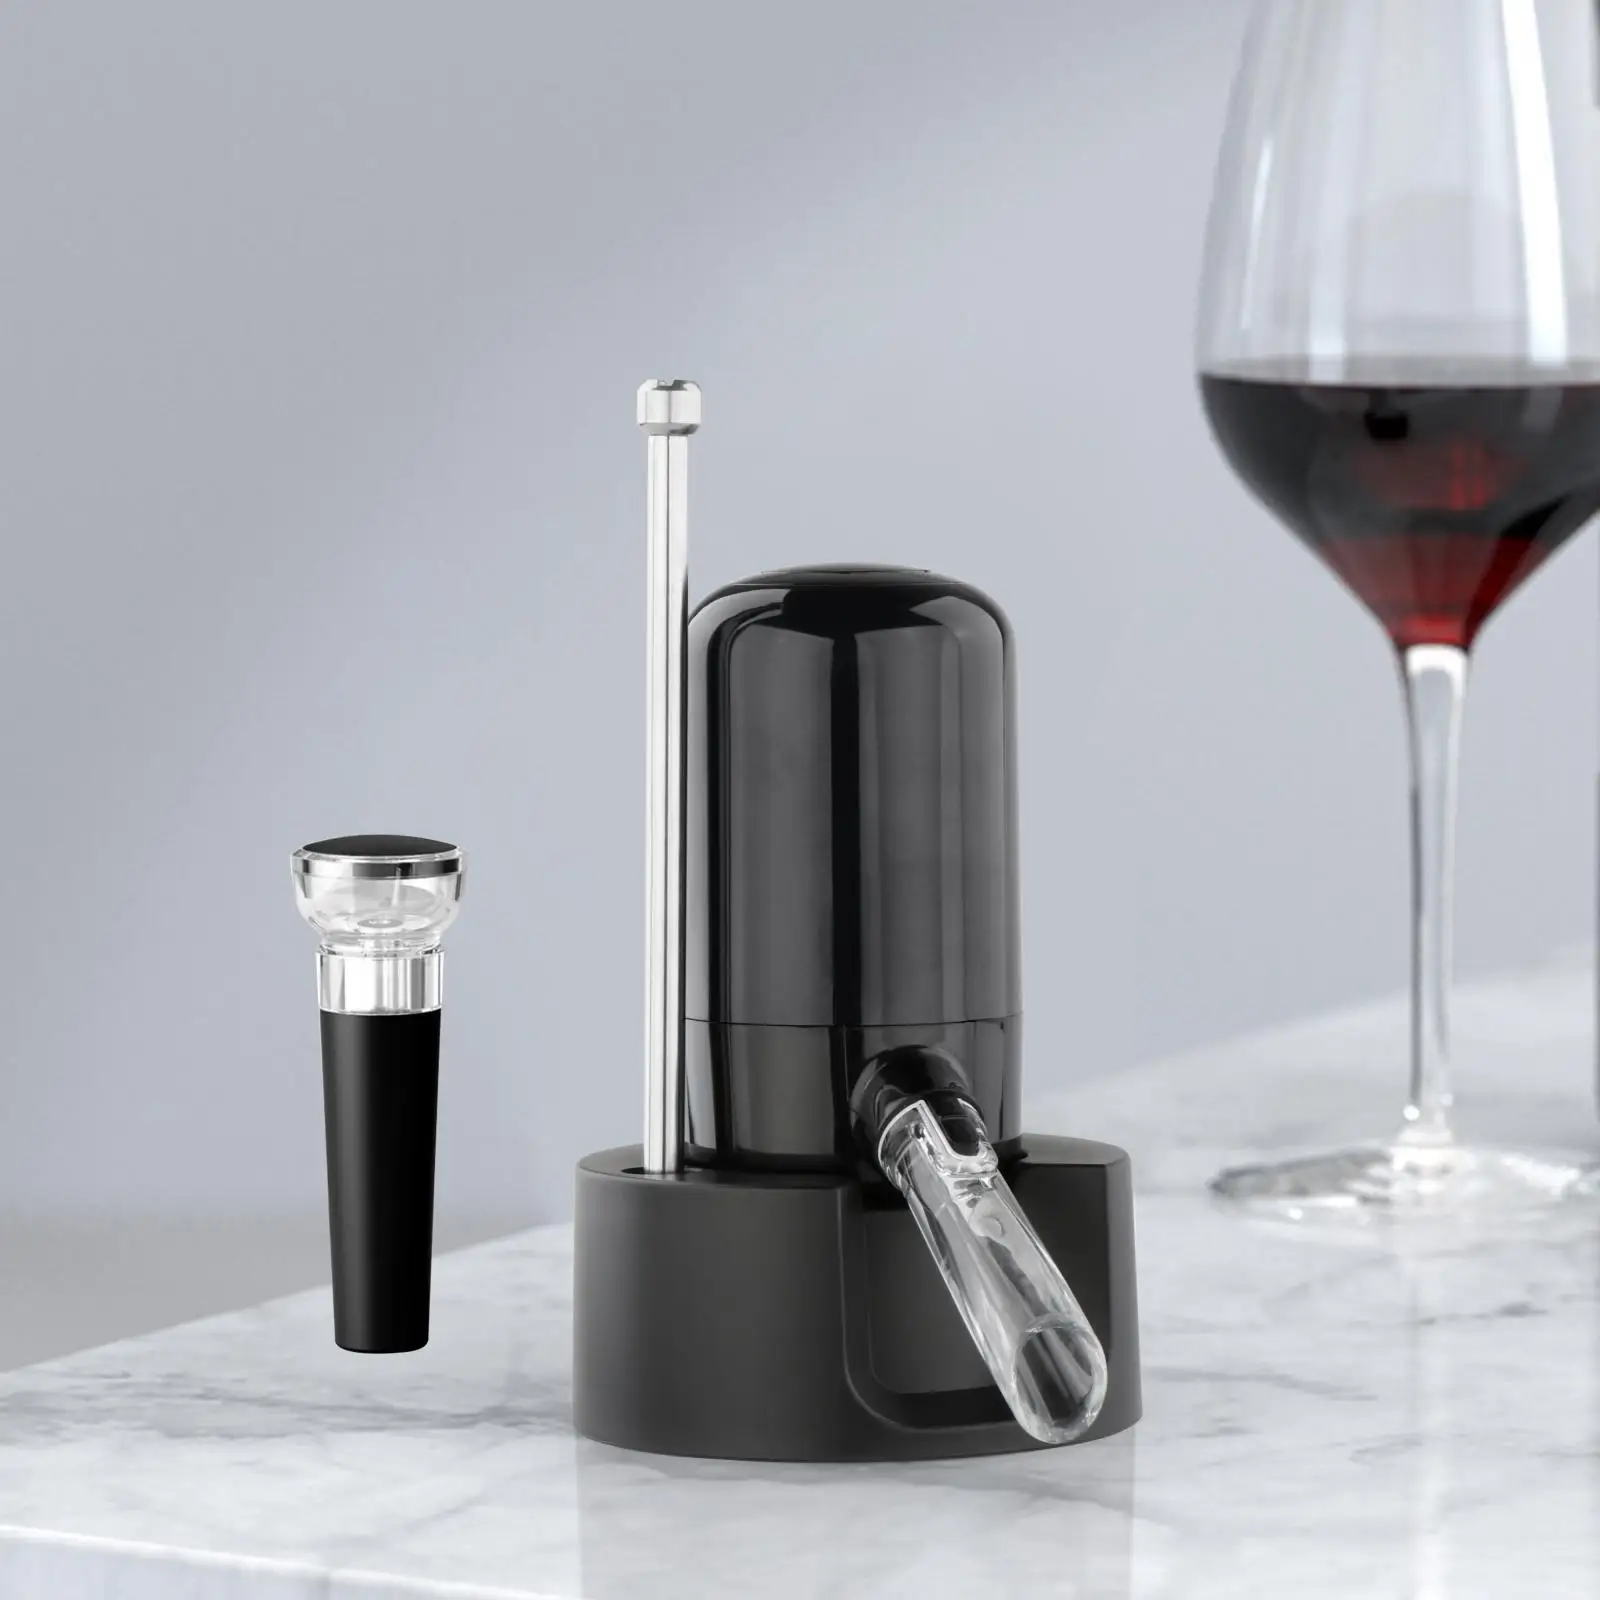 Portable wine Aerator Wine Supplies one Button Wine Aerator Pourer Electric wine Pourer for Travel Party